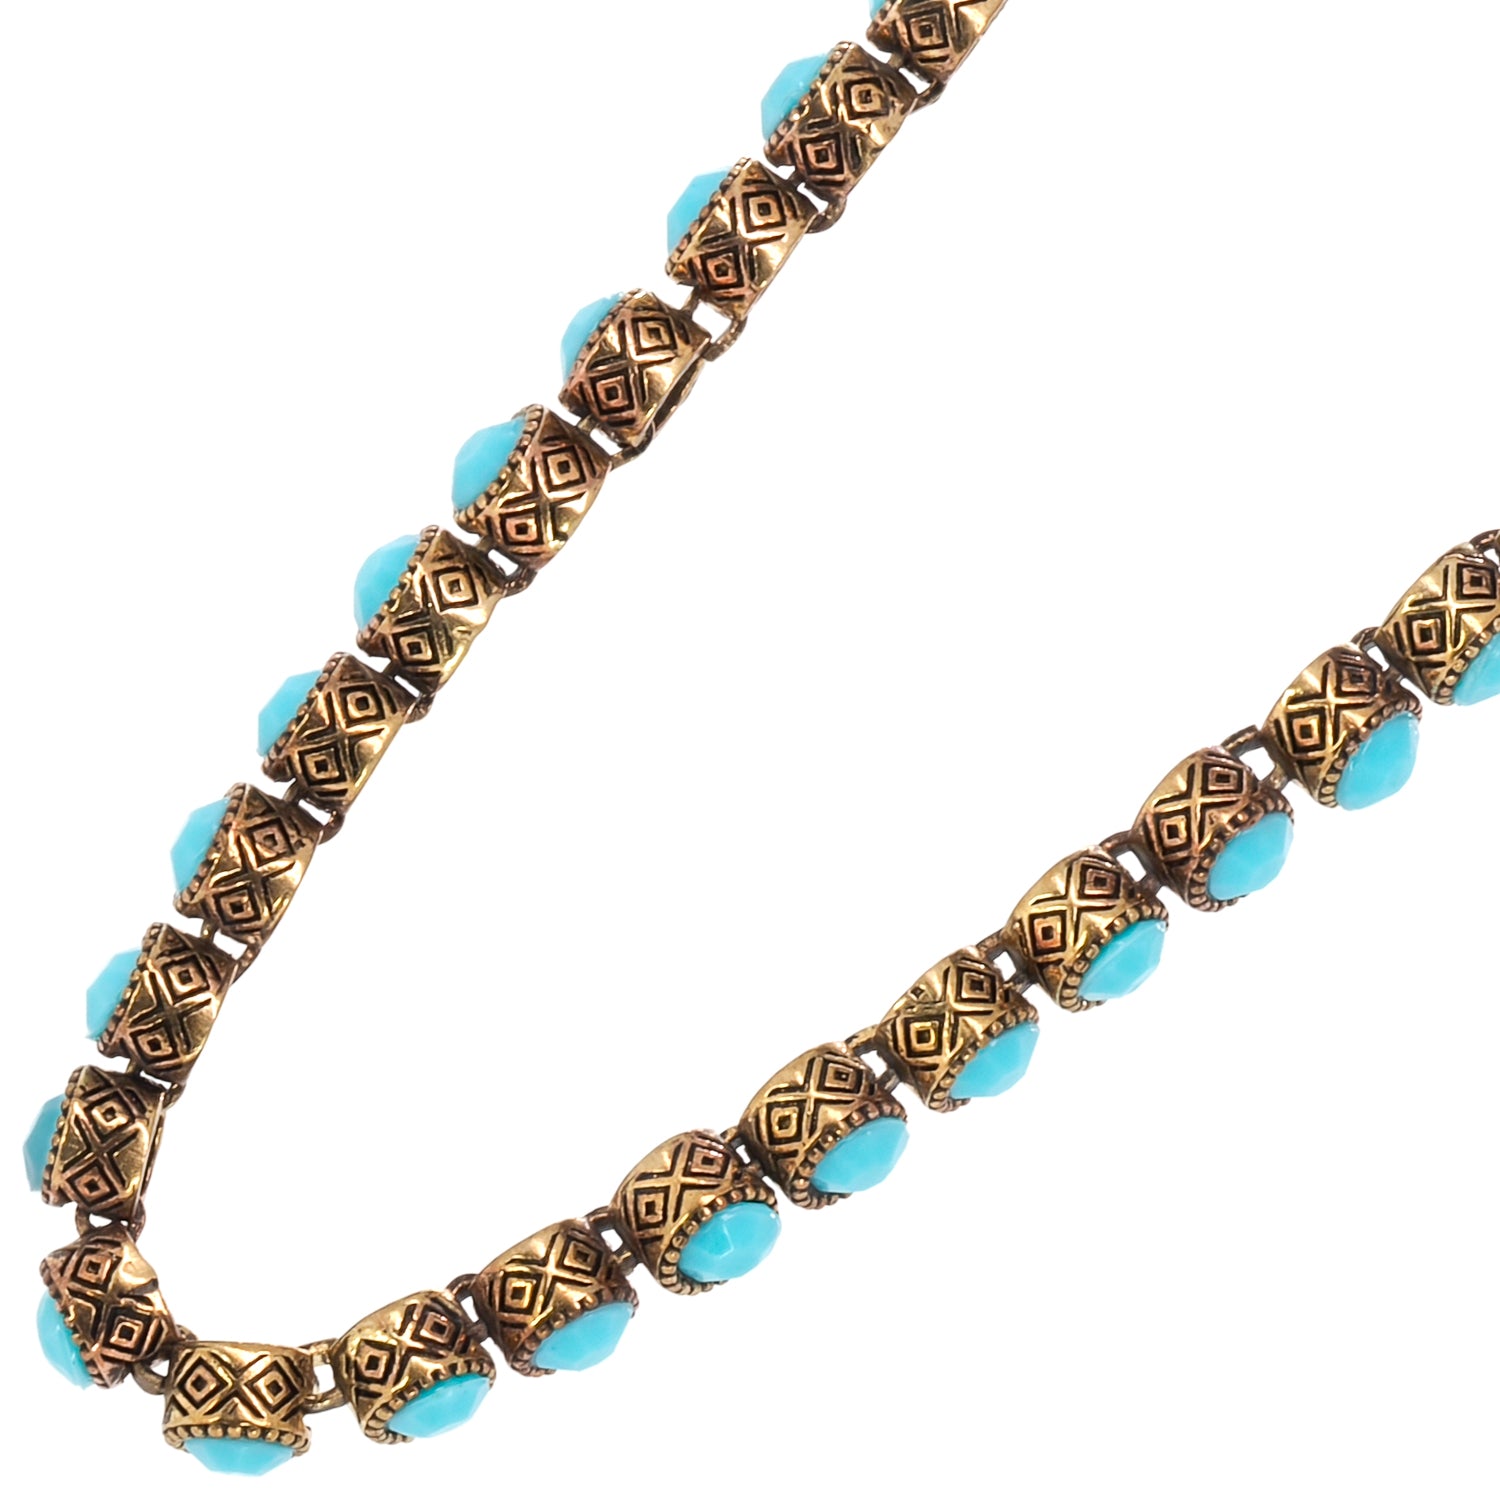 Infuse your look with spiritual energy and style with this bronze tennis necklace adorned with turquoise healing crystal stones.